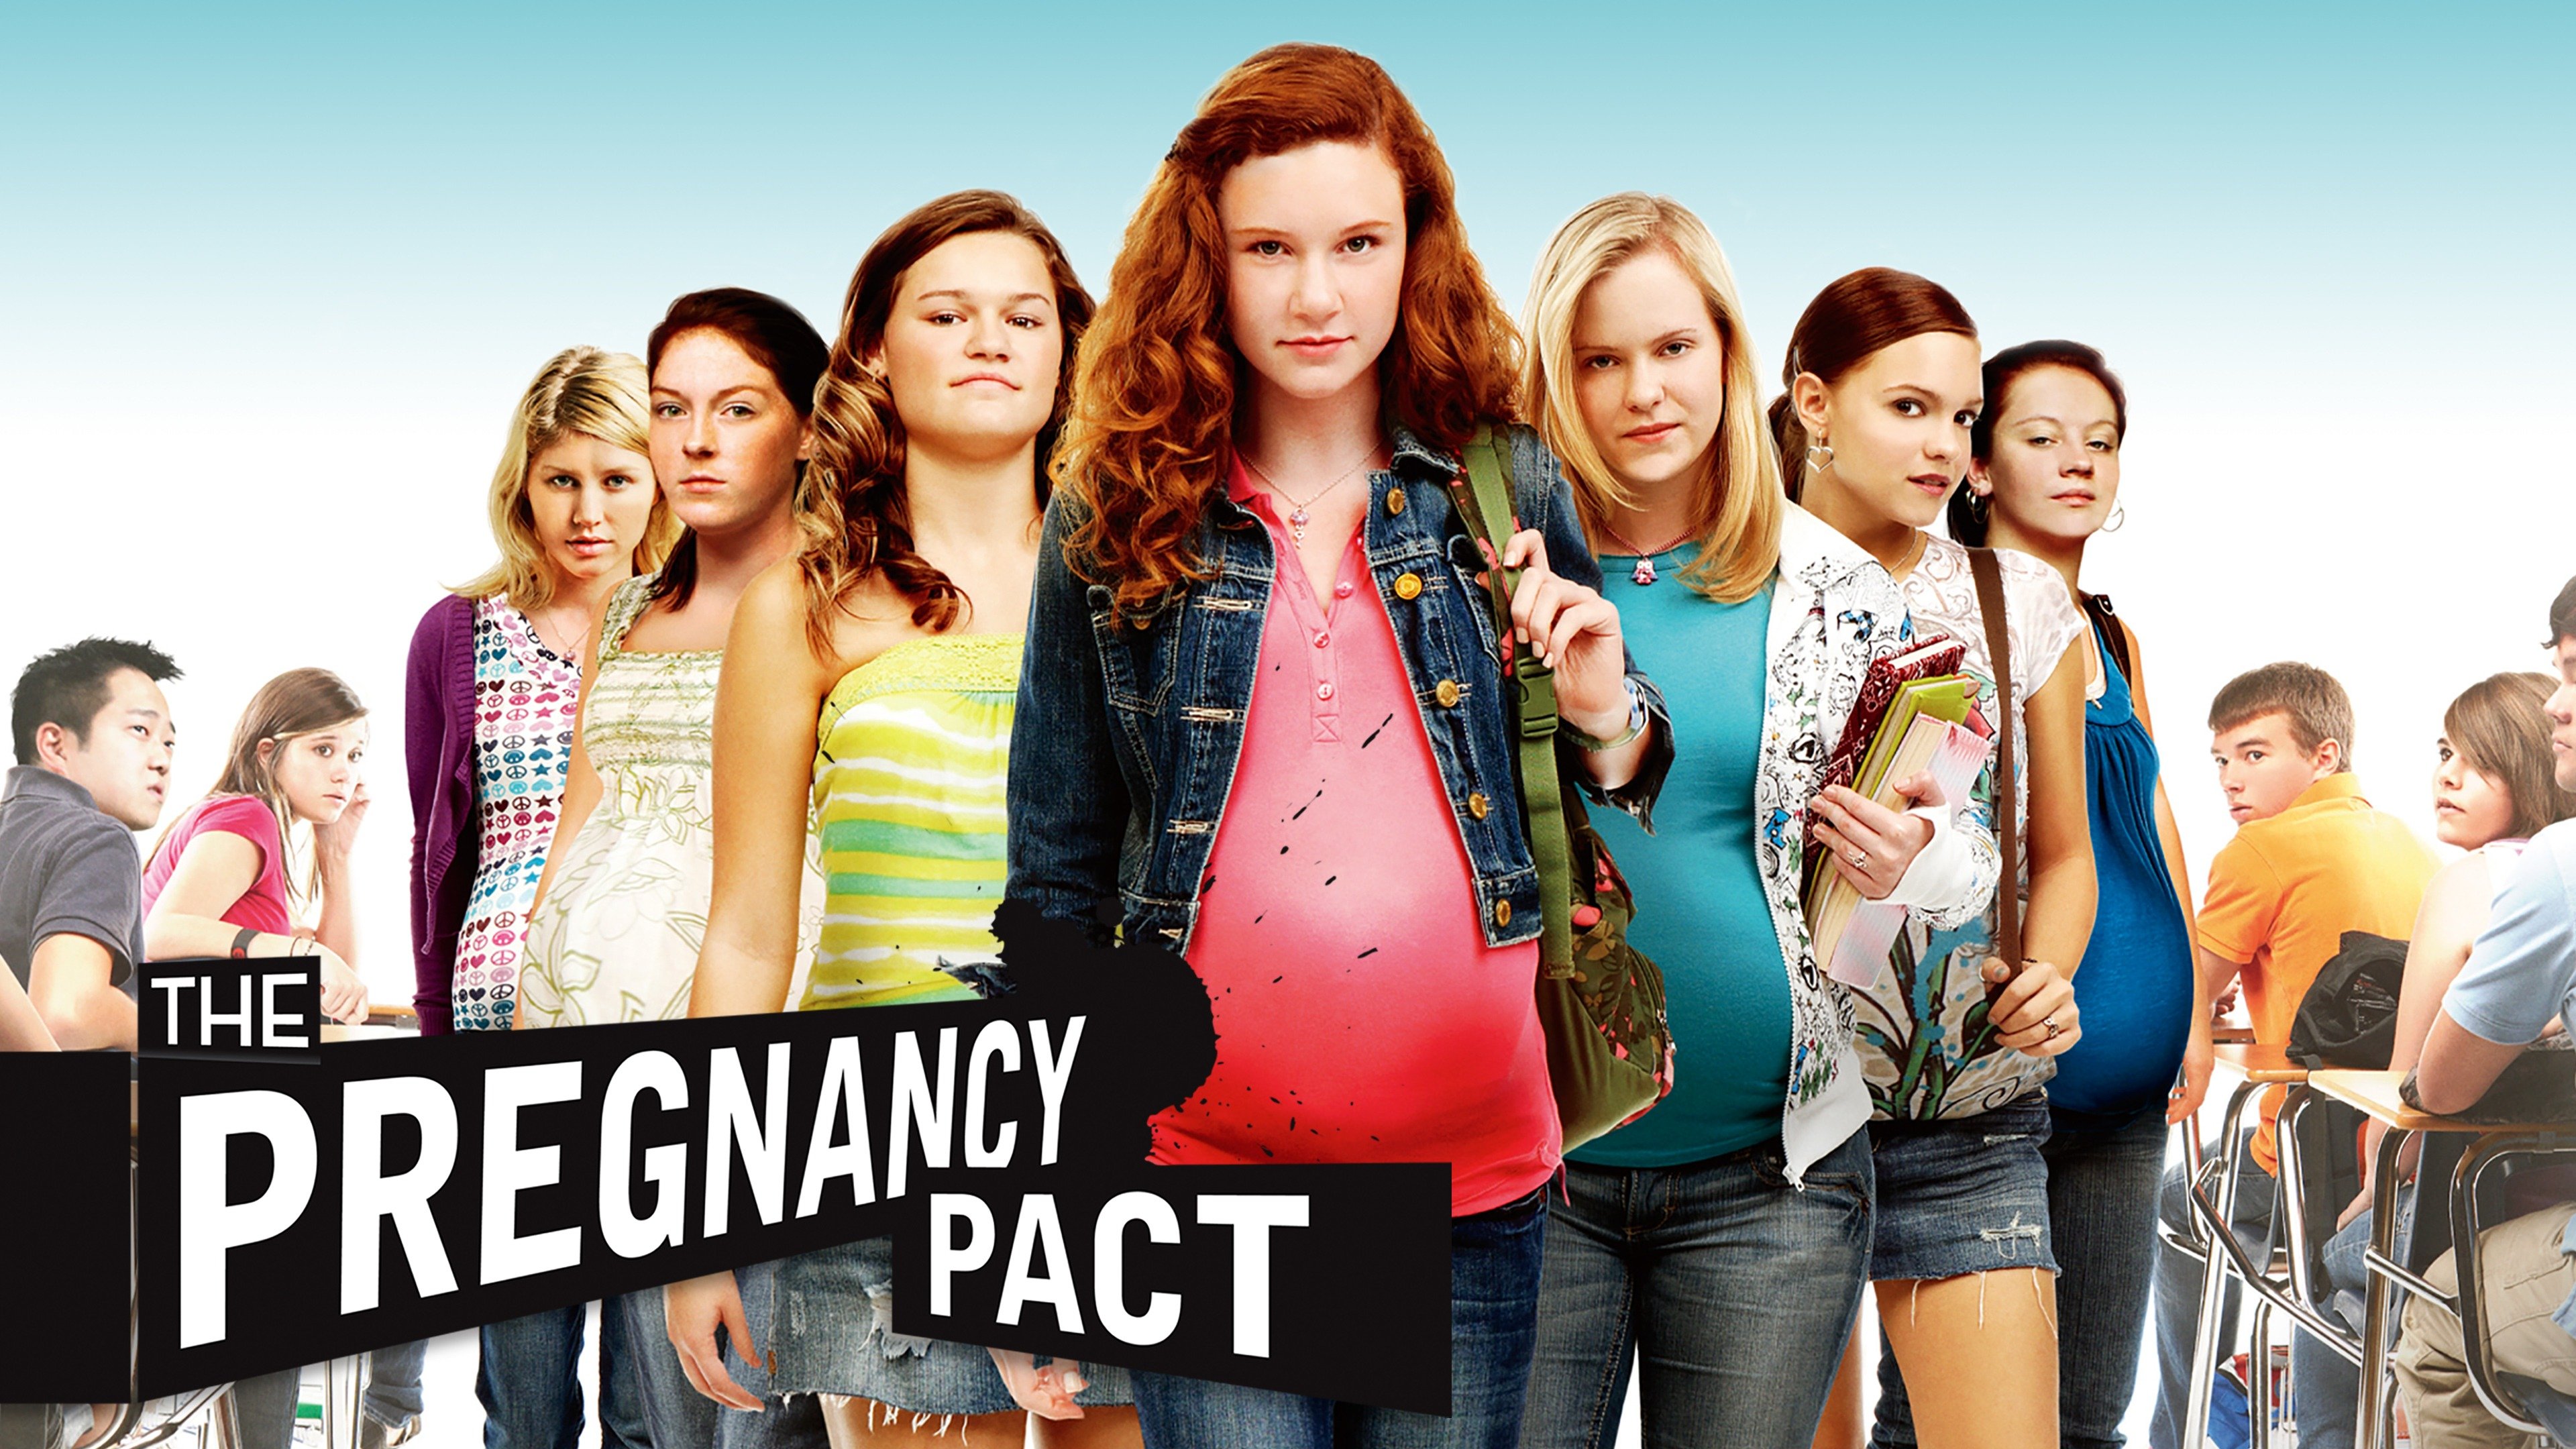 Pregnancy Pact Full Movie leaked tape